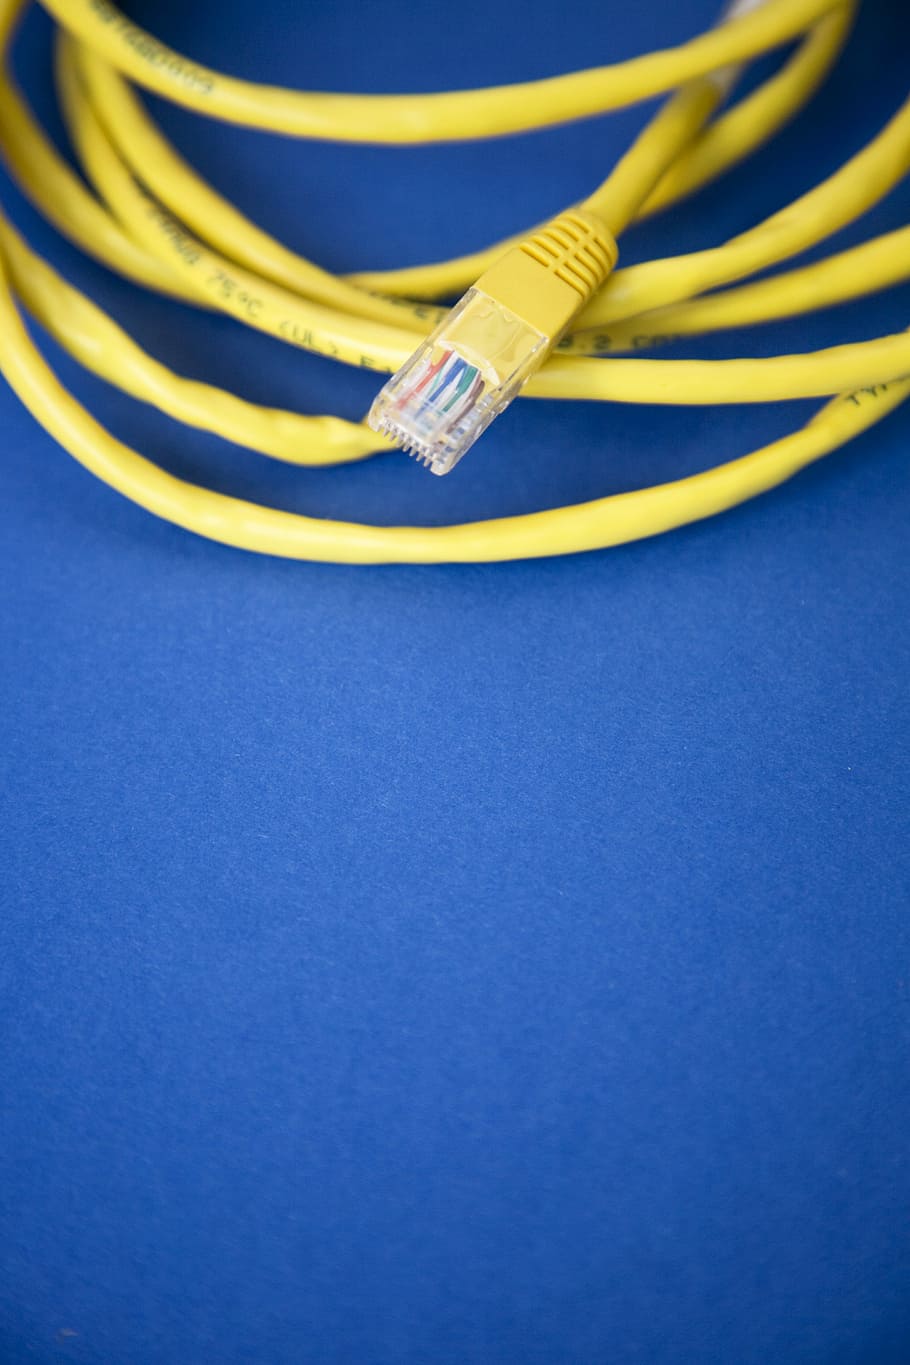 Ethernet cable on blue surface, yellow ethernet cable, tech, wired, HD wallpaper